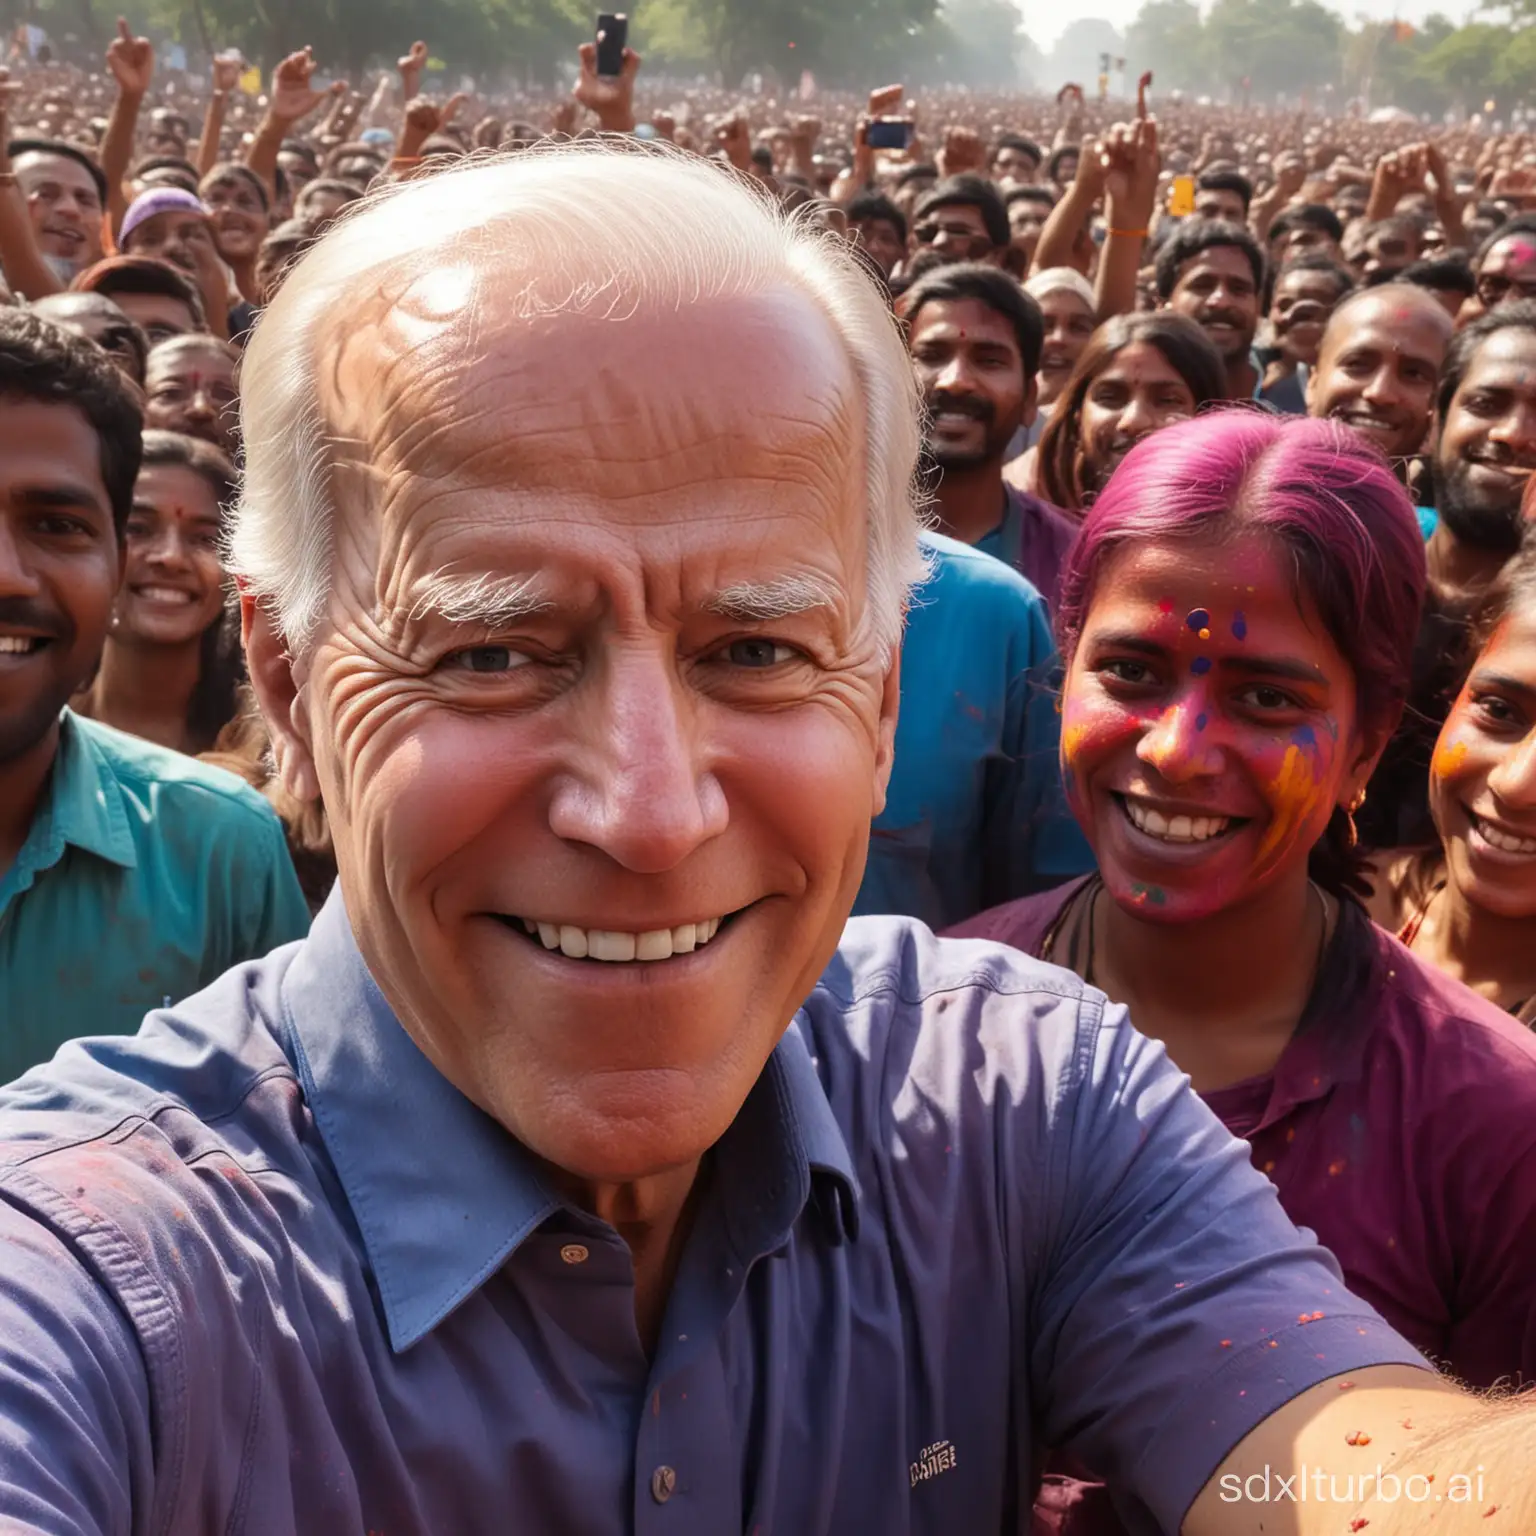 casual low quality close up selfie image taken on a cheap android phone of president joe biden smiling in a crowd of people for holi festival in india